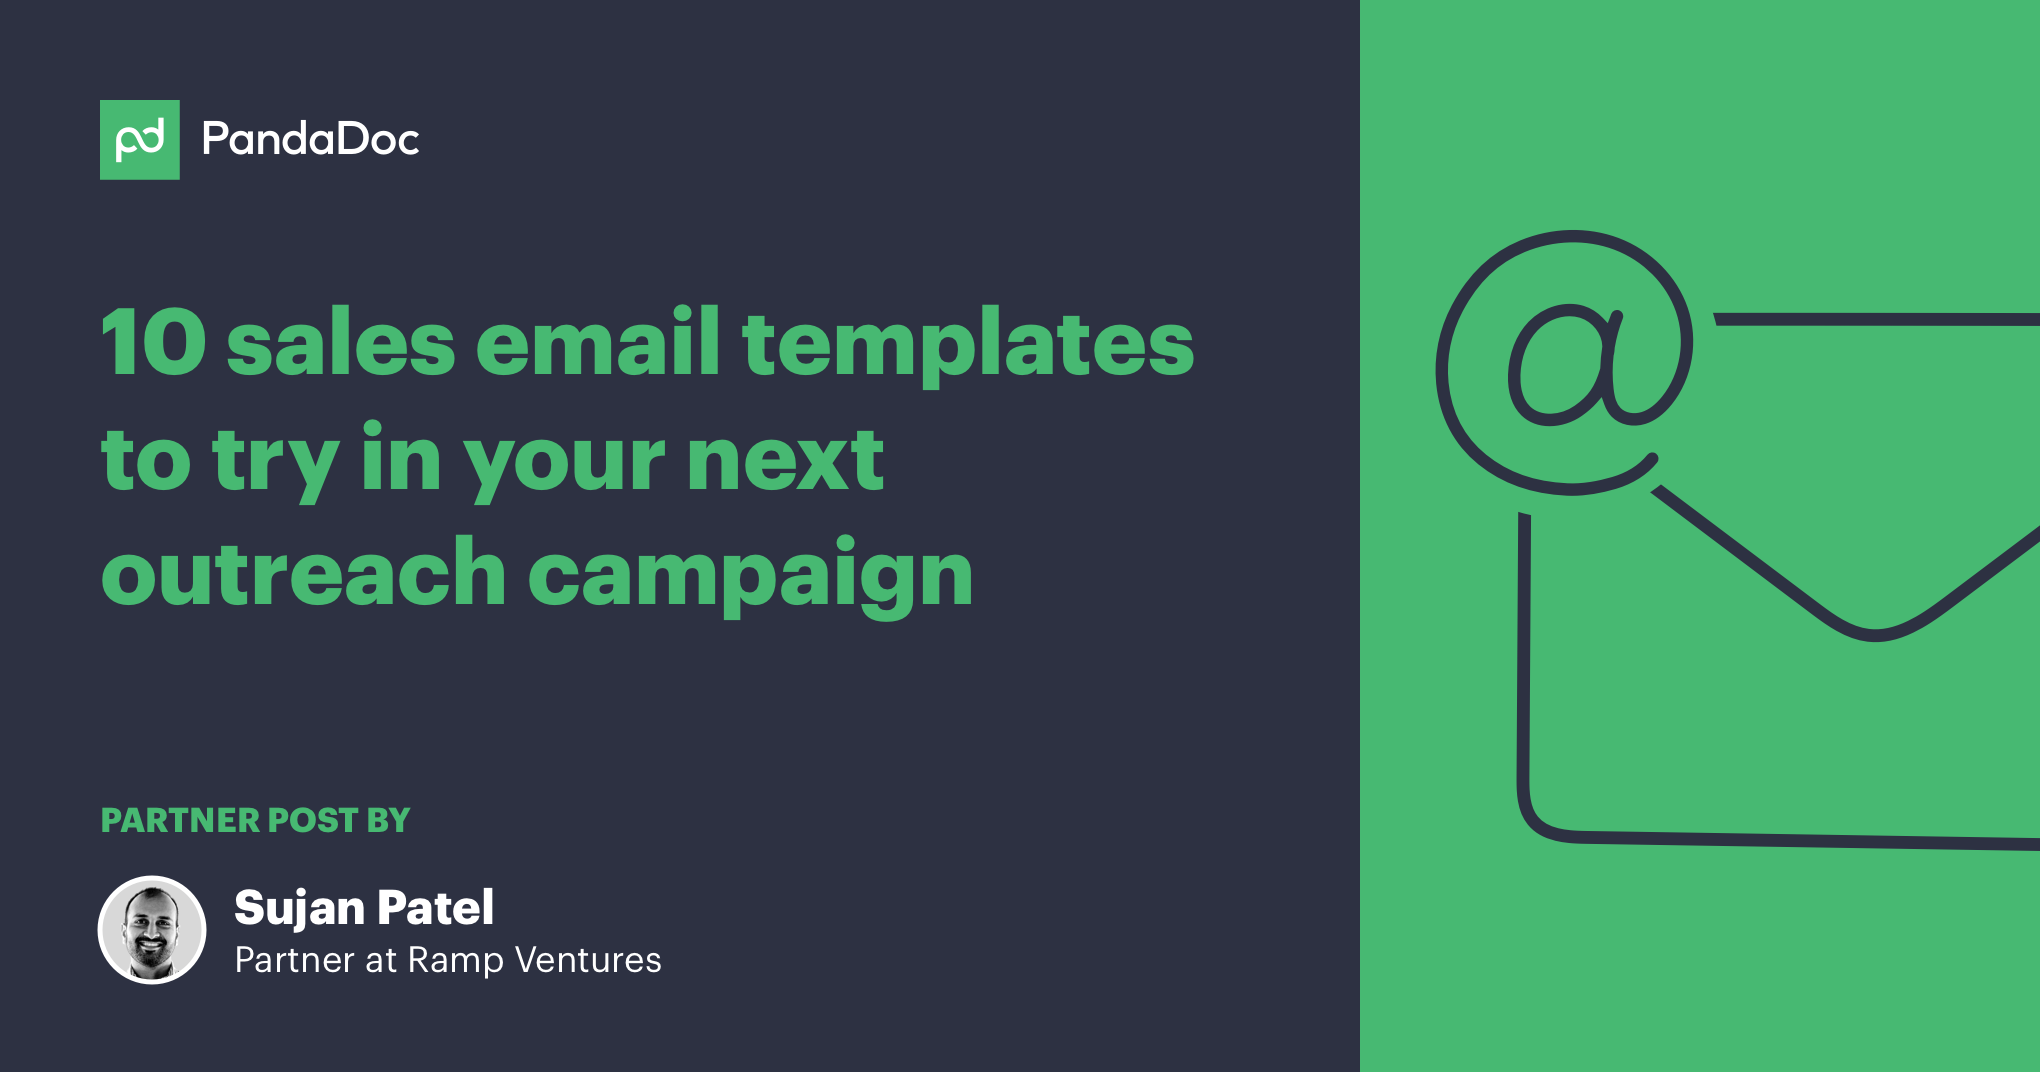 10 sales email templates to try in your next outreach campaign